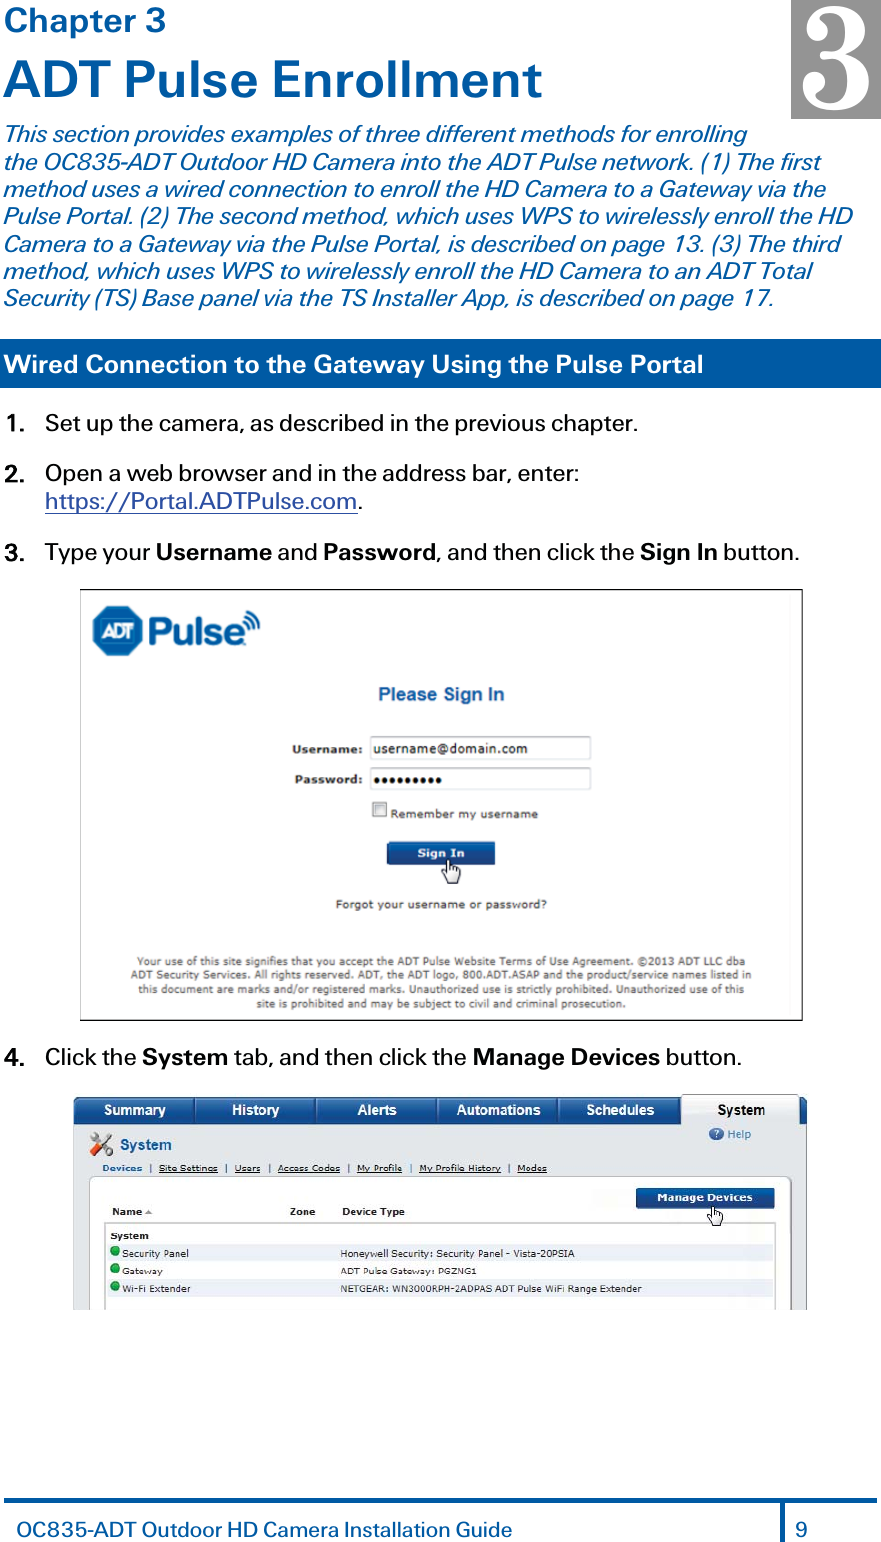 Chapter 3 ADT Pulse Enrollment This section provides examples of three different methods for enrolling the OC835-ADT Outdoor HD Camera into the ADT Pulse network. (1) The first method uses a wired connection to enroll the HD Camera to a Gateway via the Pulse Portal. (2) The second method, which uses WPS to wirelessly enroll the HD Camera to a Gateway via the Pulse Portal, is described on page 13. (3) The third method, which uses WPS to wirelessly enroll the HD Camera to an ADT Total Security (TS) Base panel via the TS Installer App, is described on page 17. Wired Connection to the Gateway Using the Pulse Portal 1. Set up the camera, as described in the previous chapter. 2. Open a web browser and in the address bar, enter: https://Portal.ADTPulse.com. 3. Type your Username and Password, and then click the Sign In button.  4. Click the System tab, and then click the Manage Devices button.  3 OC835-ADT Outdoor HD Camera Installation Guide 9 